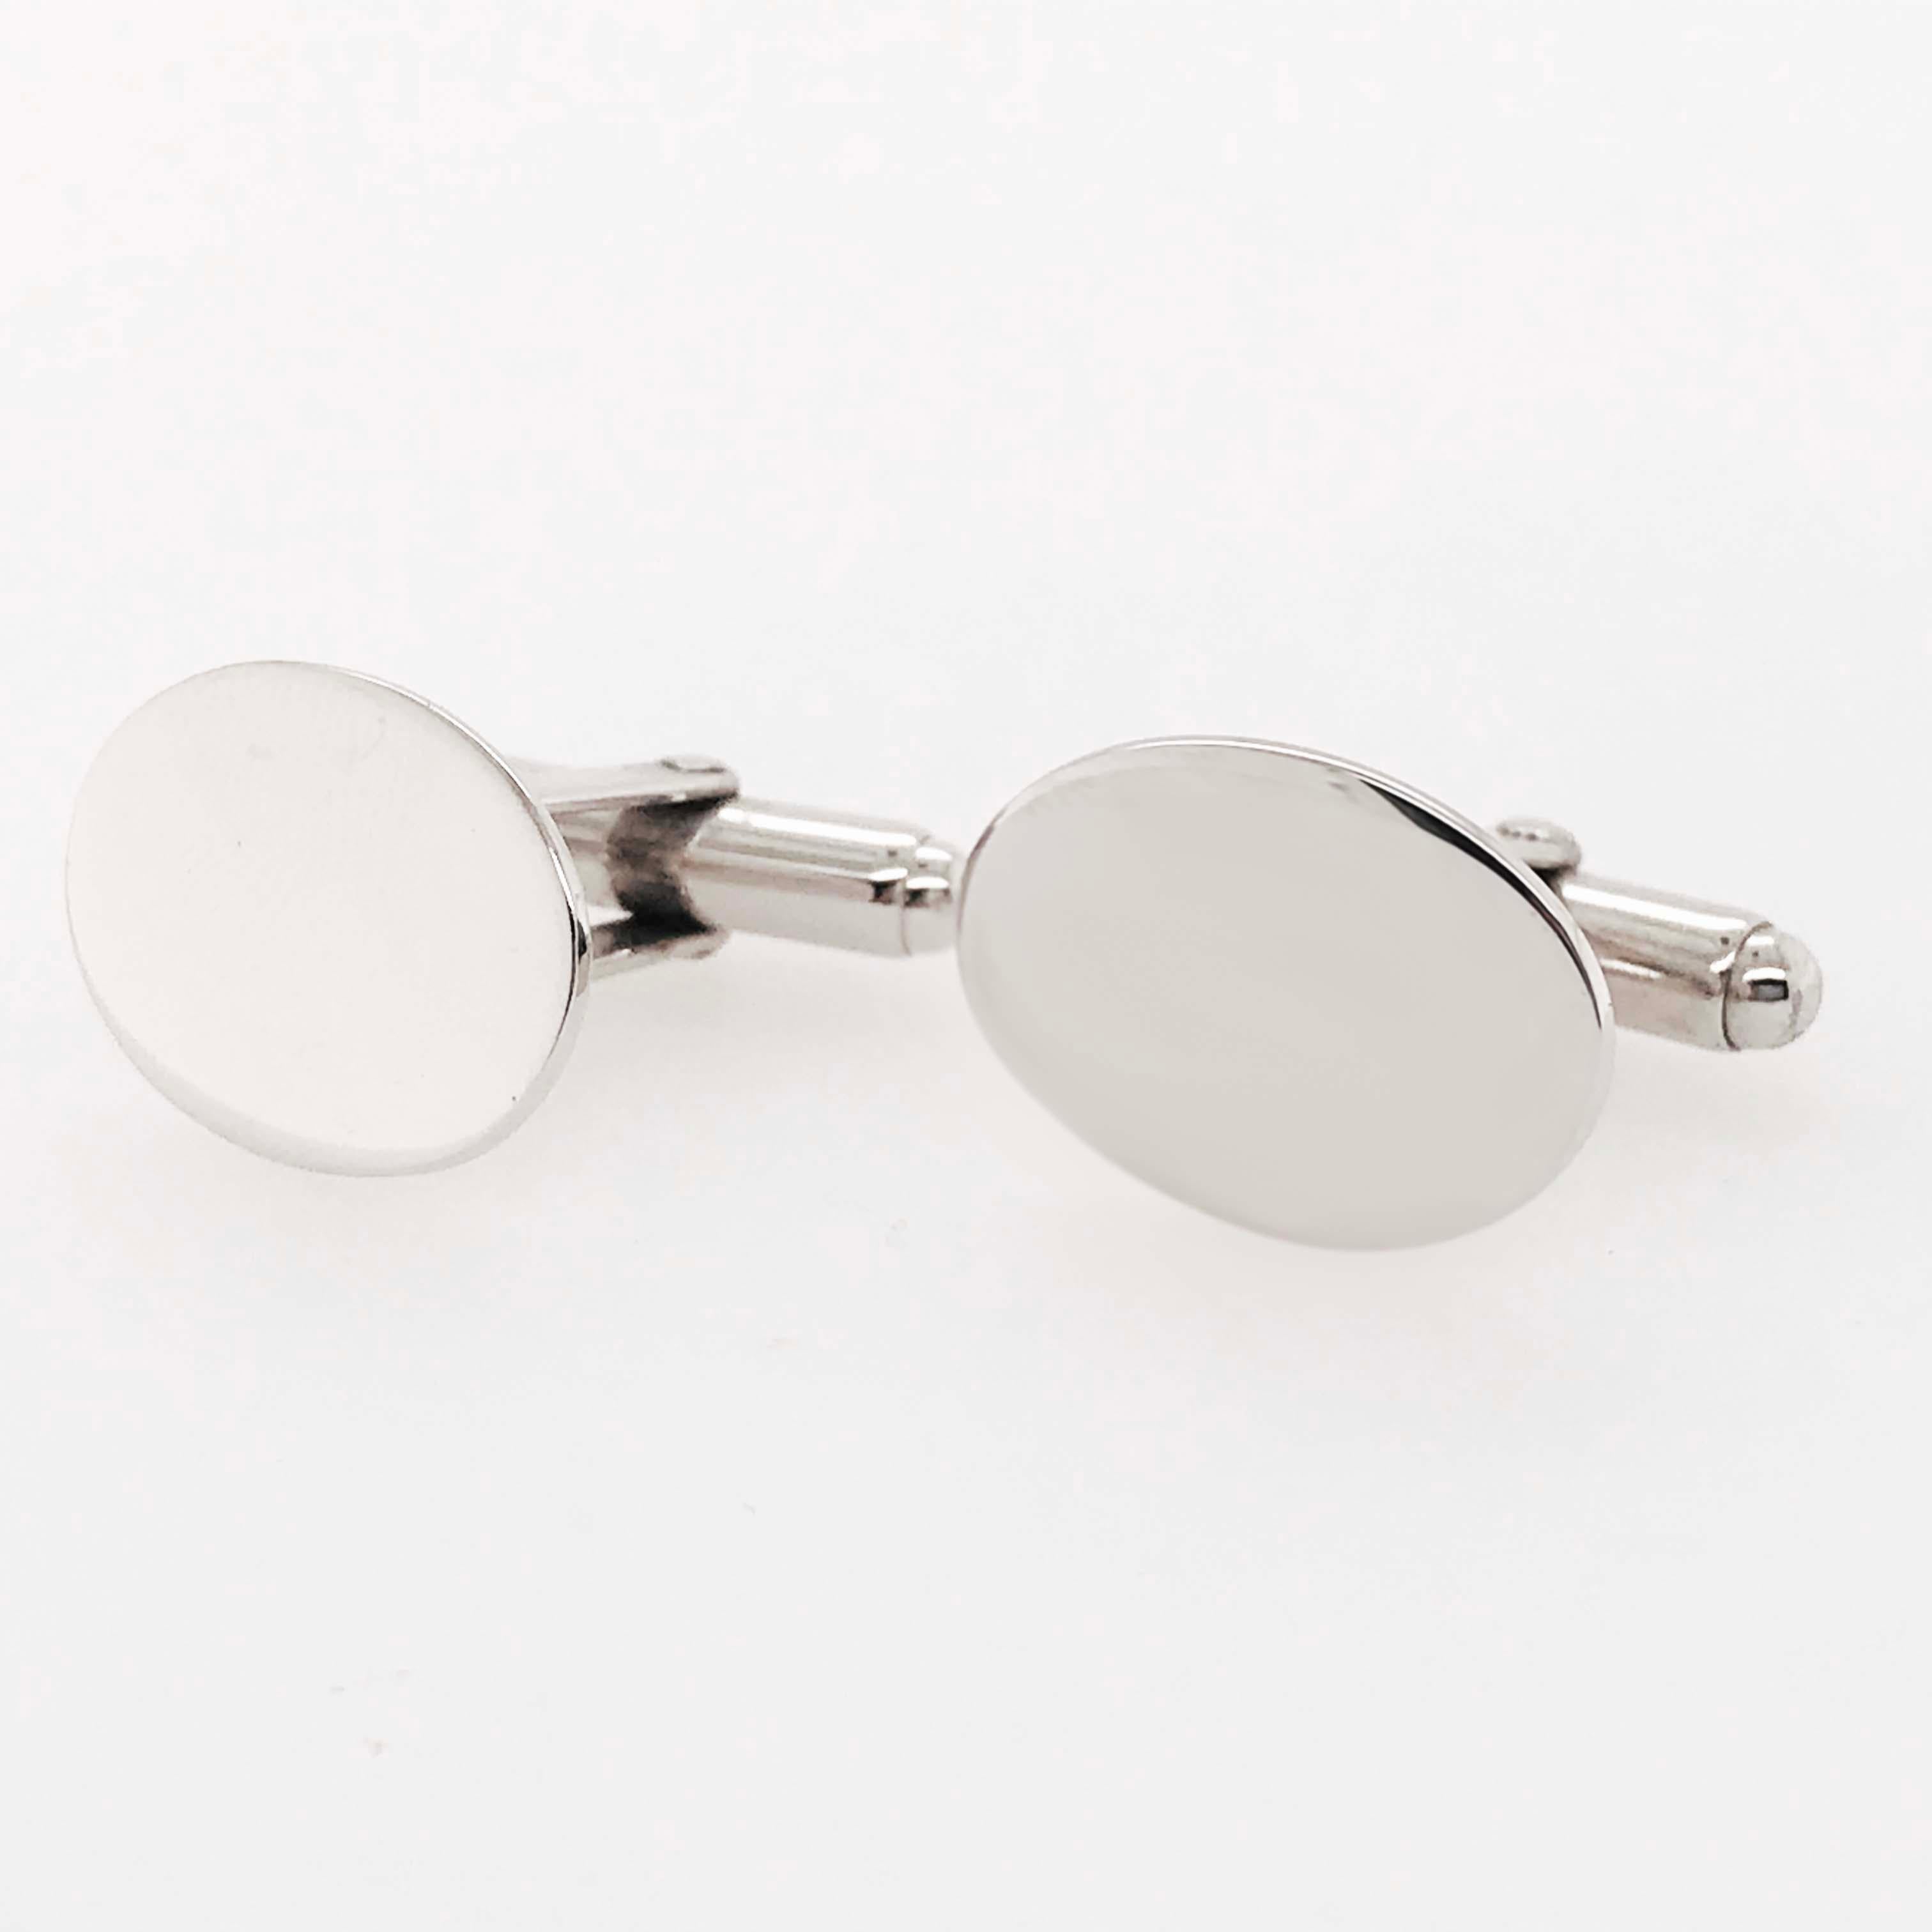 These high polish, sterling silver, oval cuff-links are stylish and modern! With a clean, high polish finish on an oval shaped cuff-link. These men's cuff-links are versatile and go with any formal wear! The sterling silver cuff-links were carefully